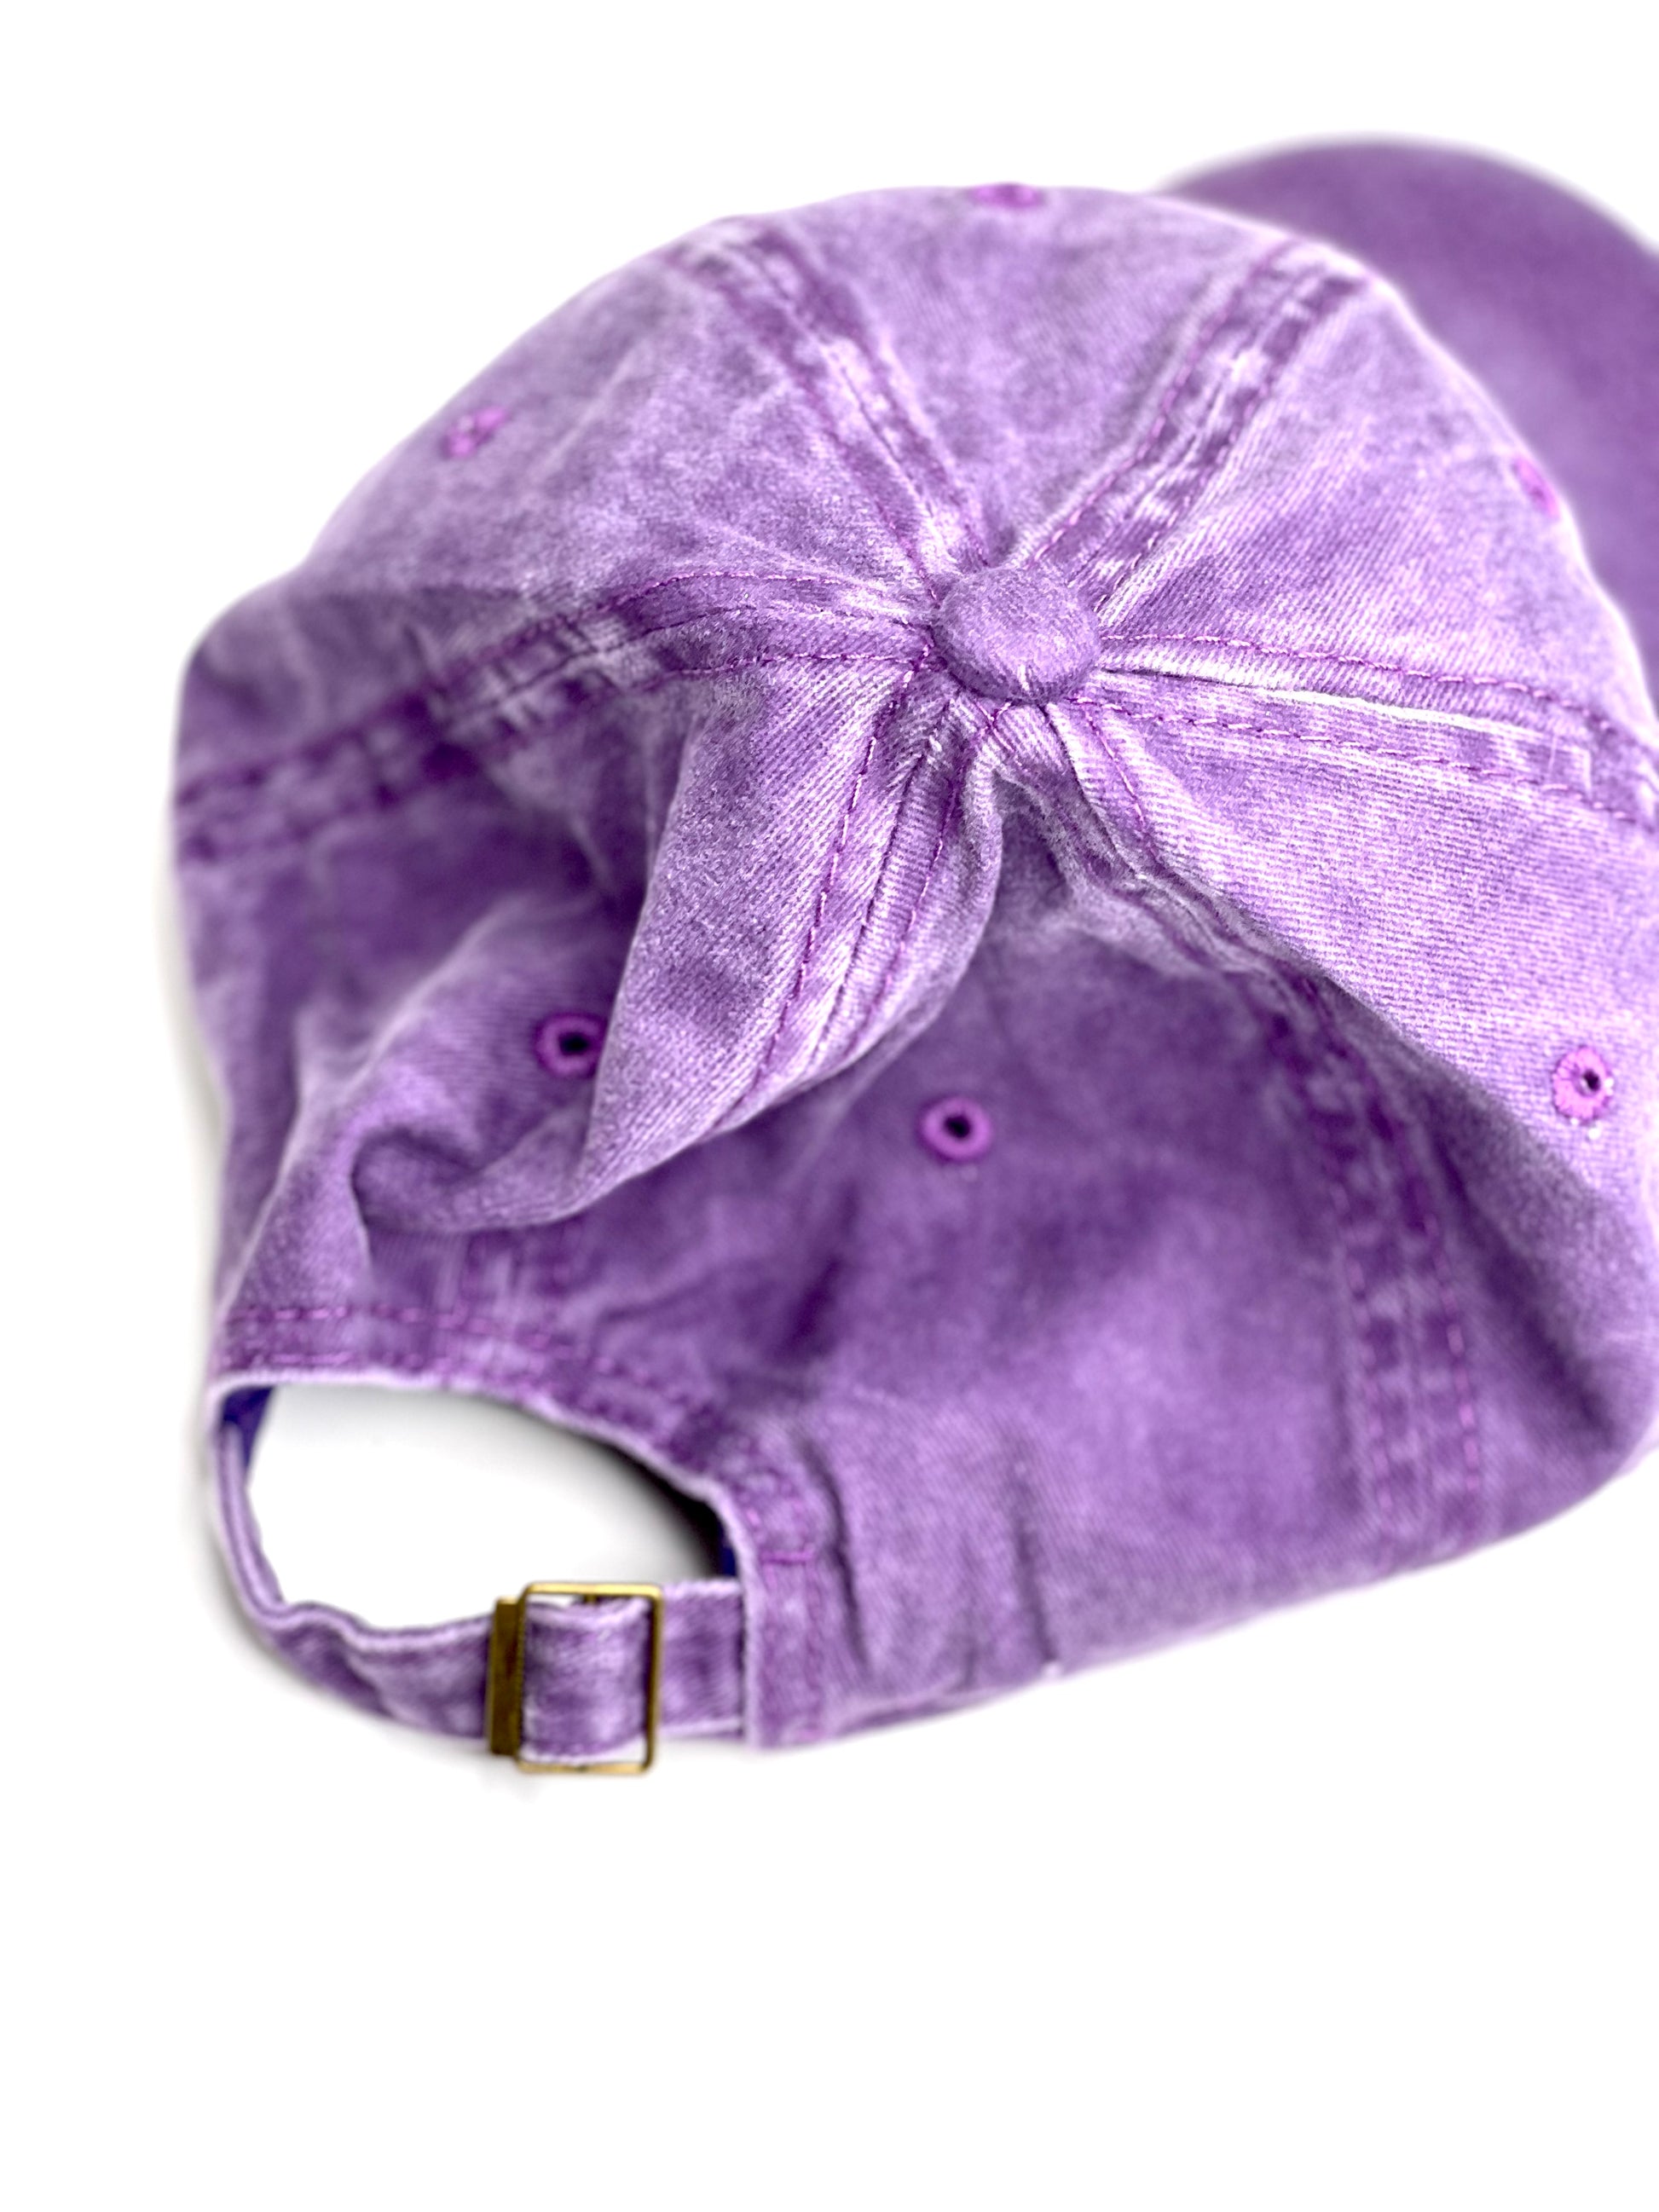 LL6 - Purple Dad Hat White/Silver - Patches Of Upcycling